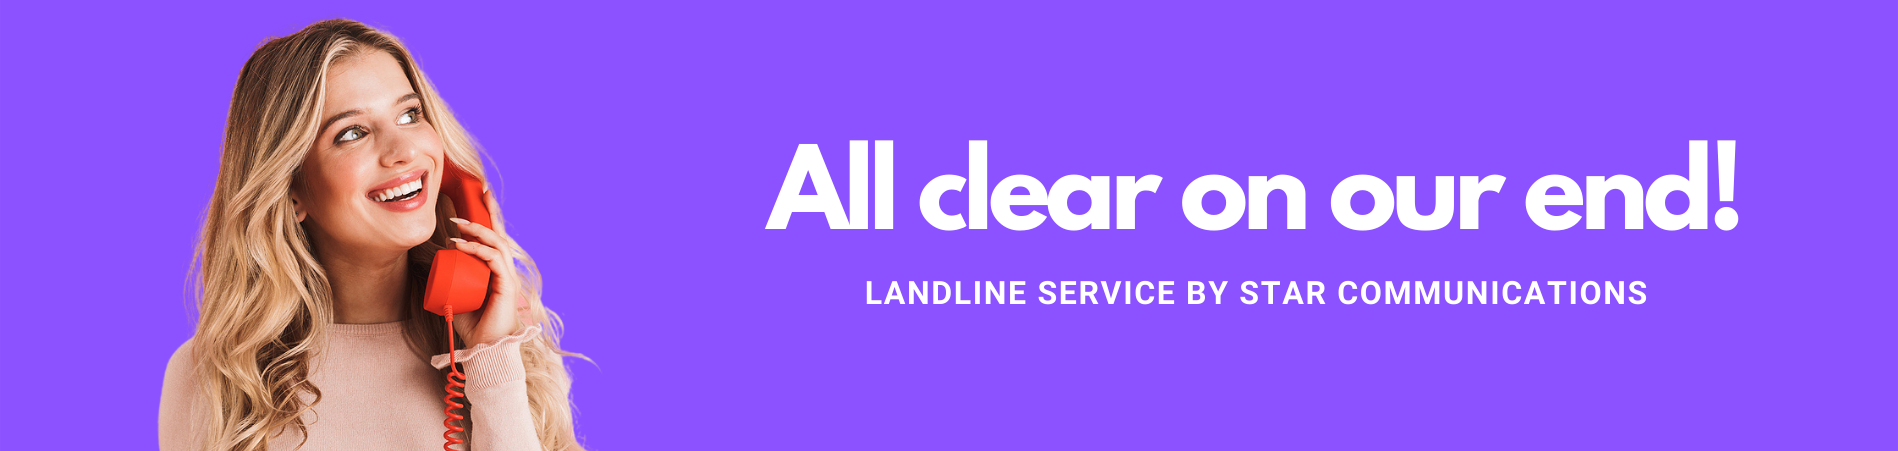 All clear on our end. Landline service by Star Communications.